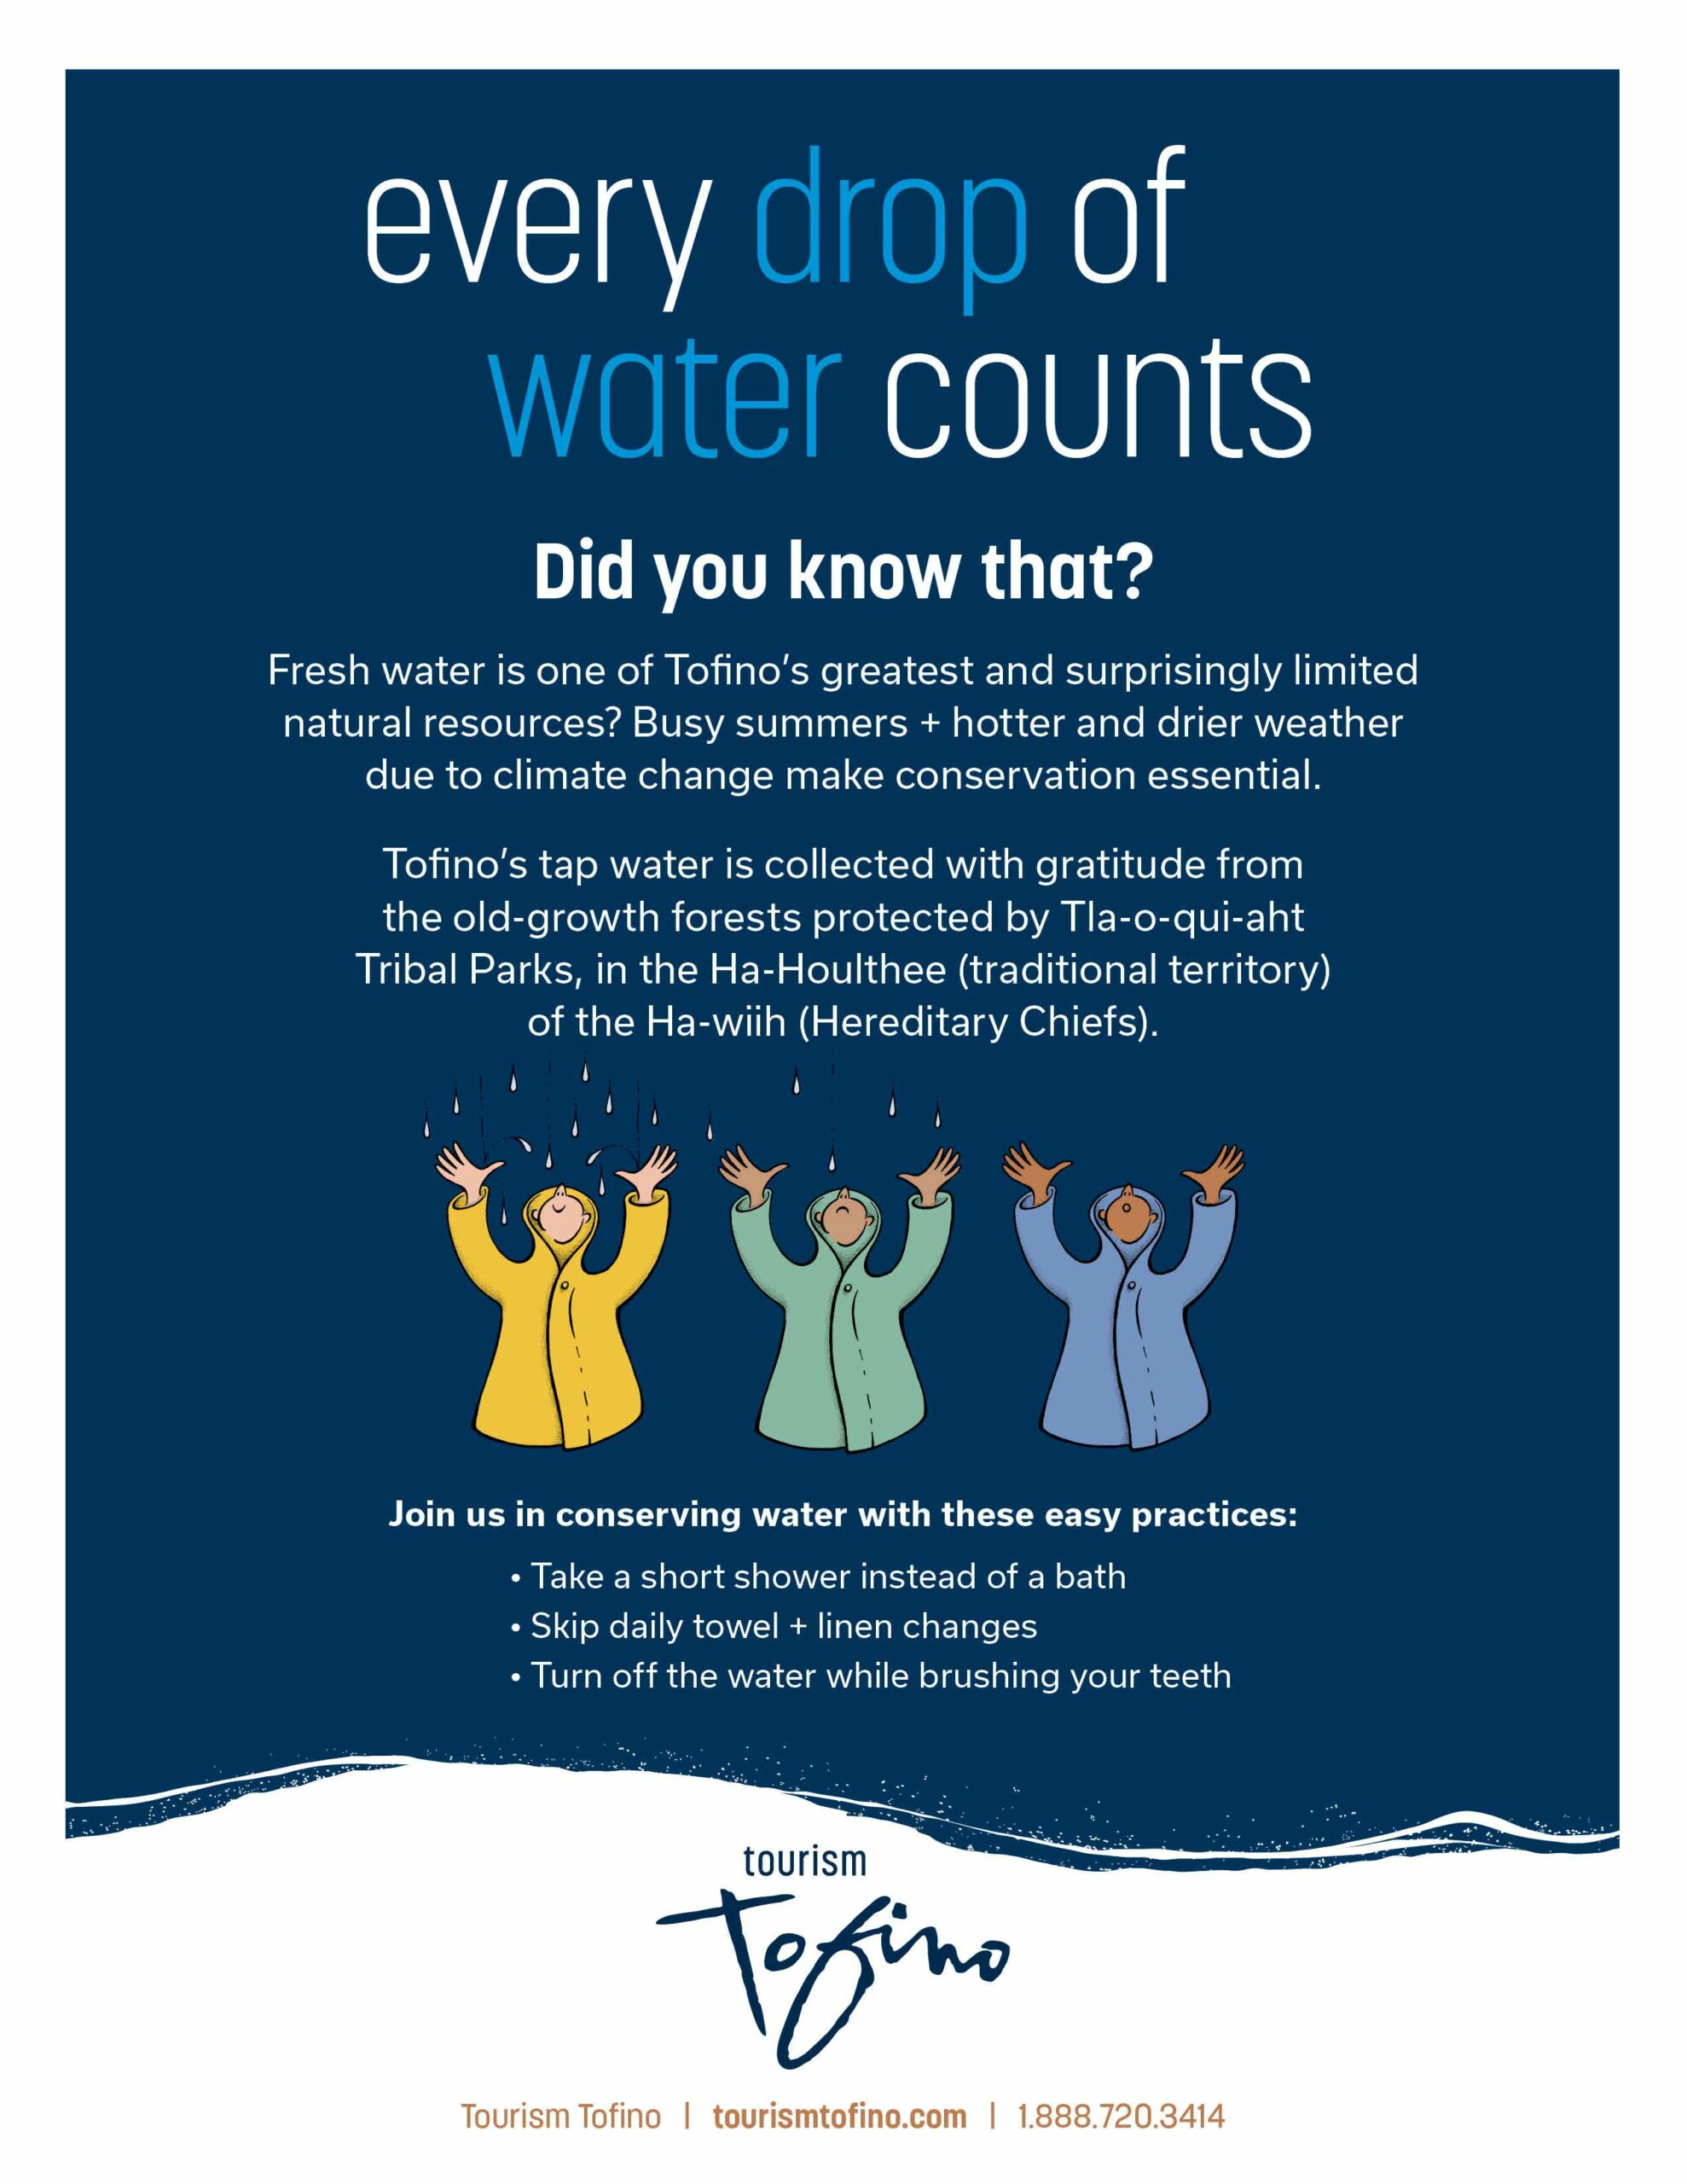 Every Drop of Water Counts water conservation poster